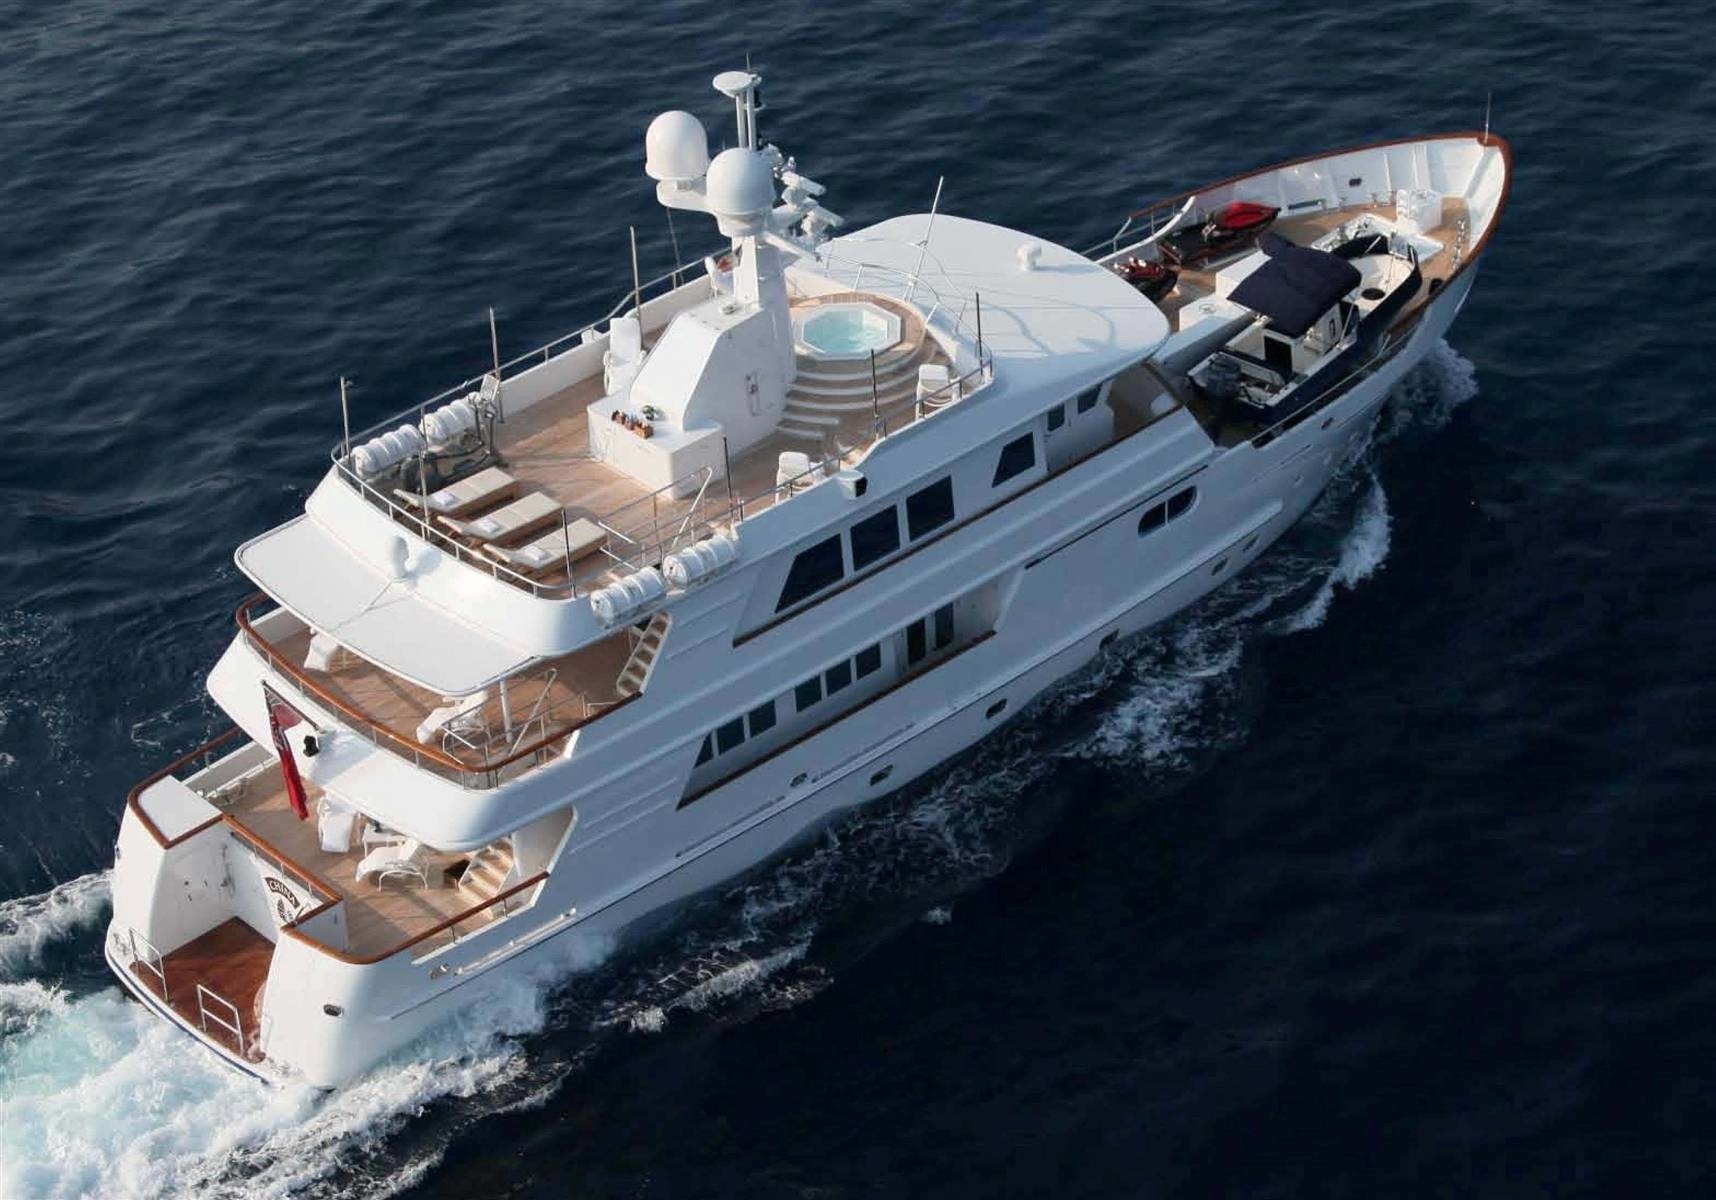 The 34m Yacht RELENTLESS